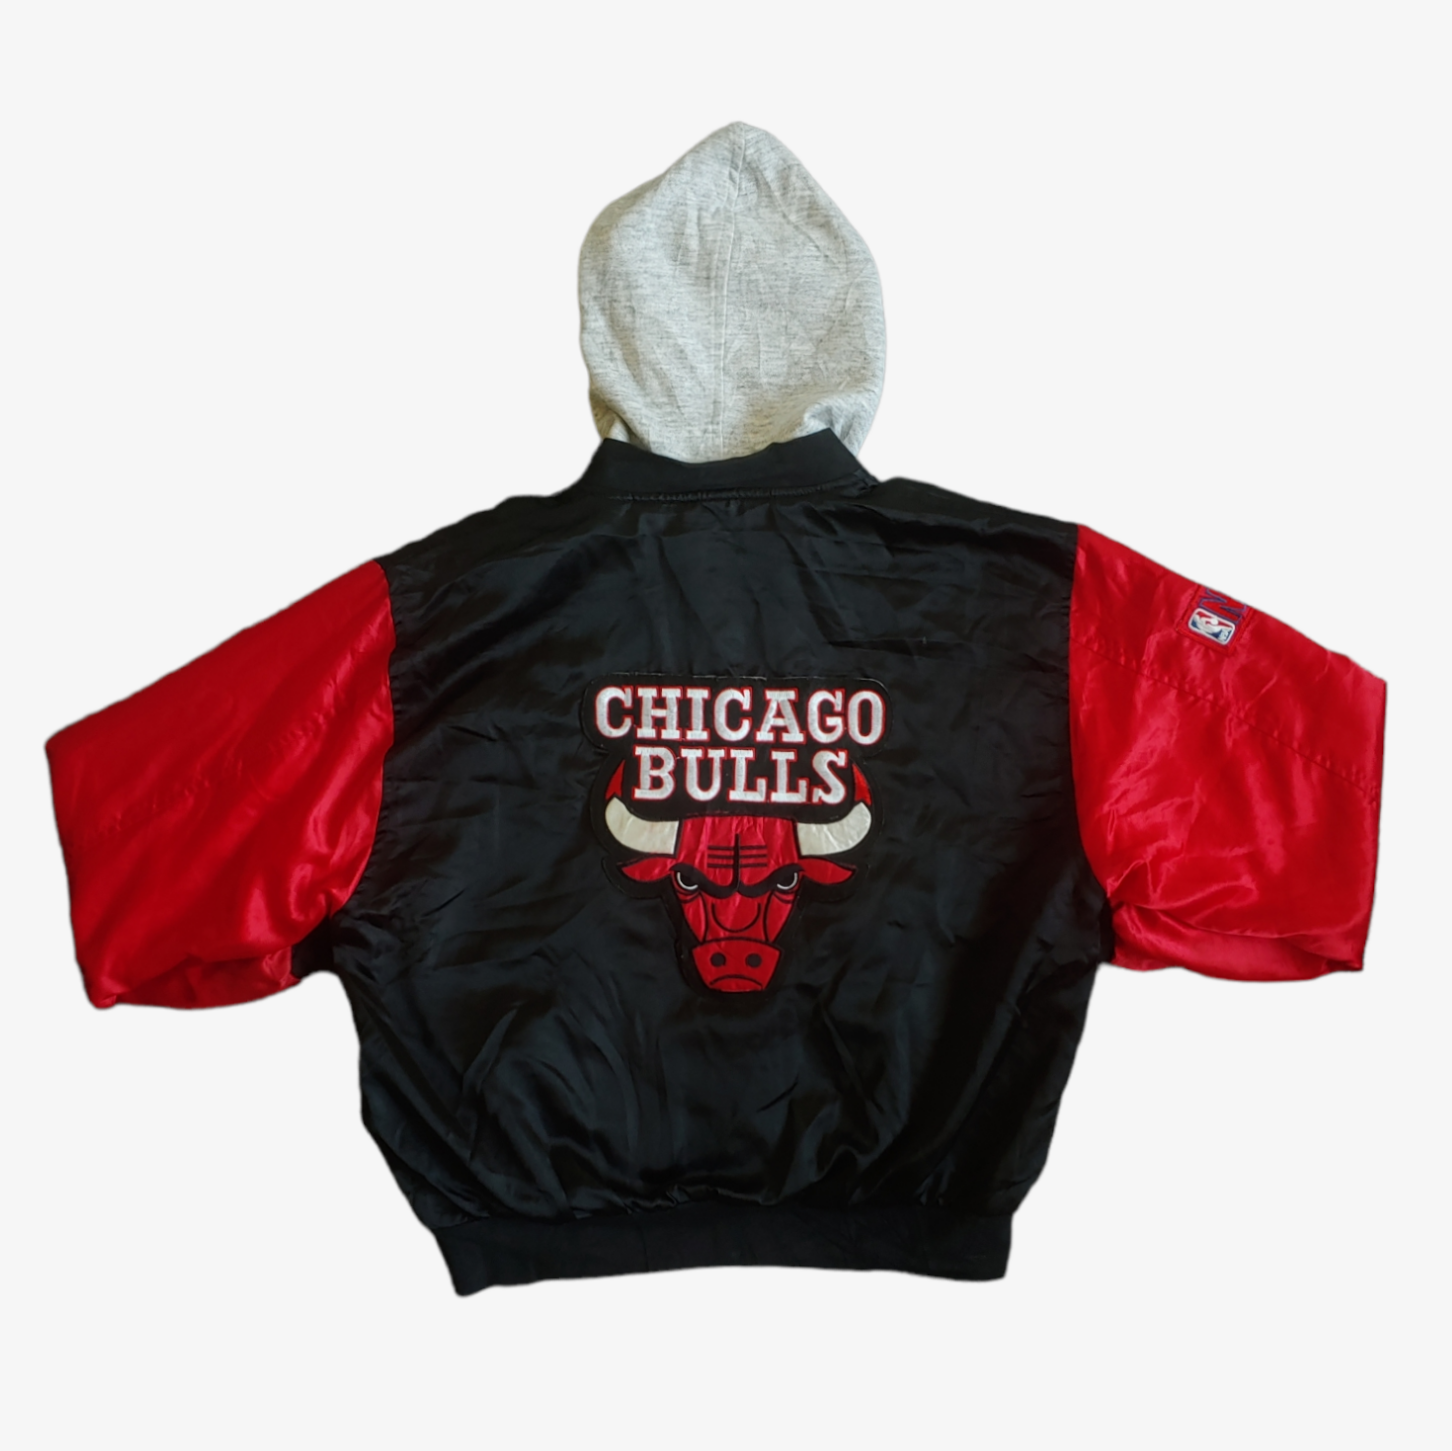 Vintage 90s NBA Chicago Bulls Jacket With Back Spell Out Logo Back - Casspios Dream